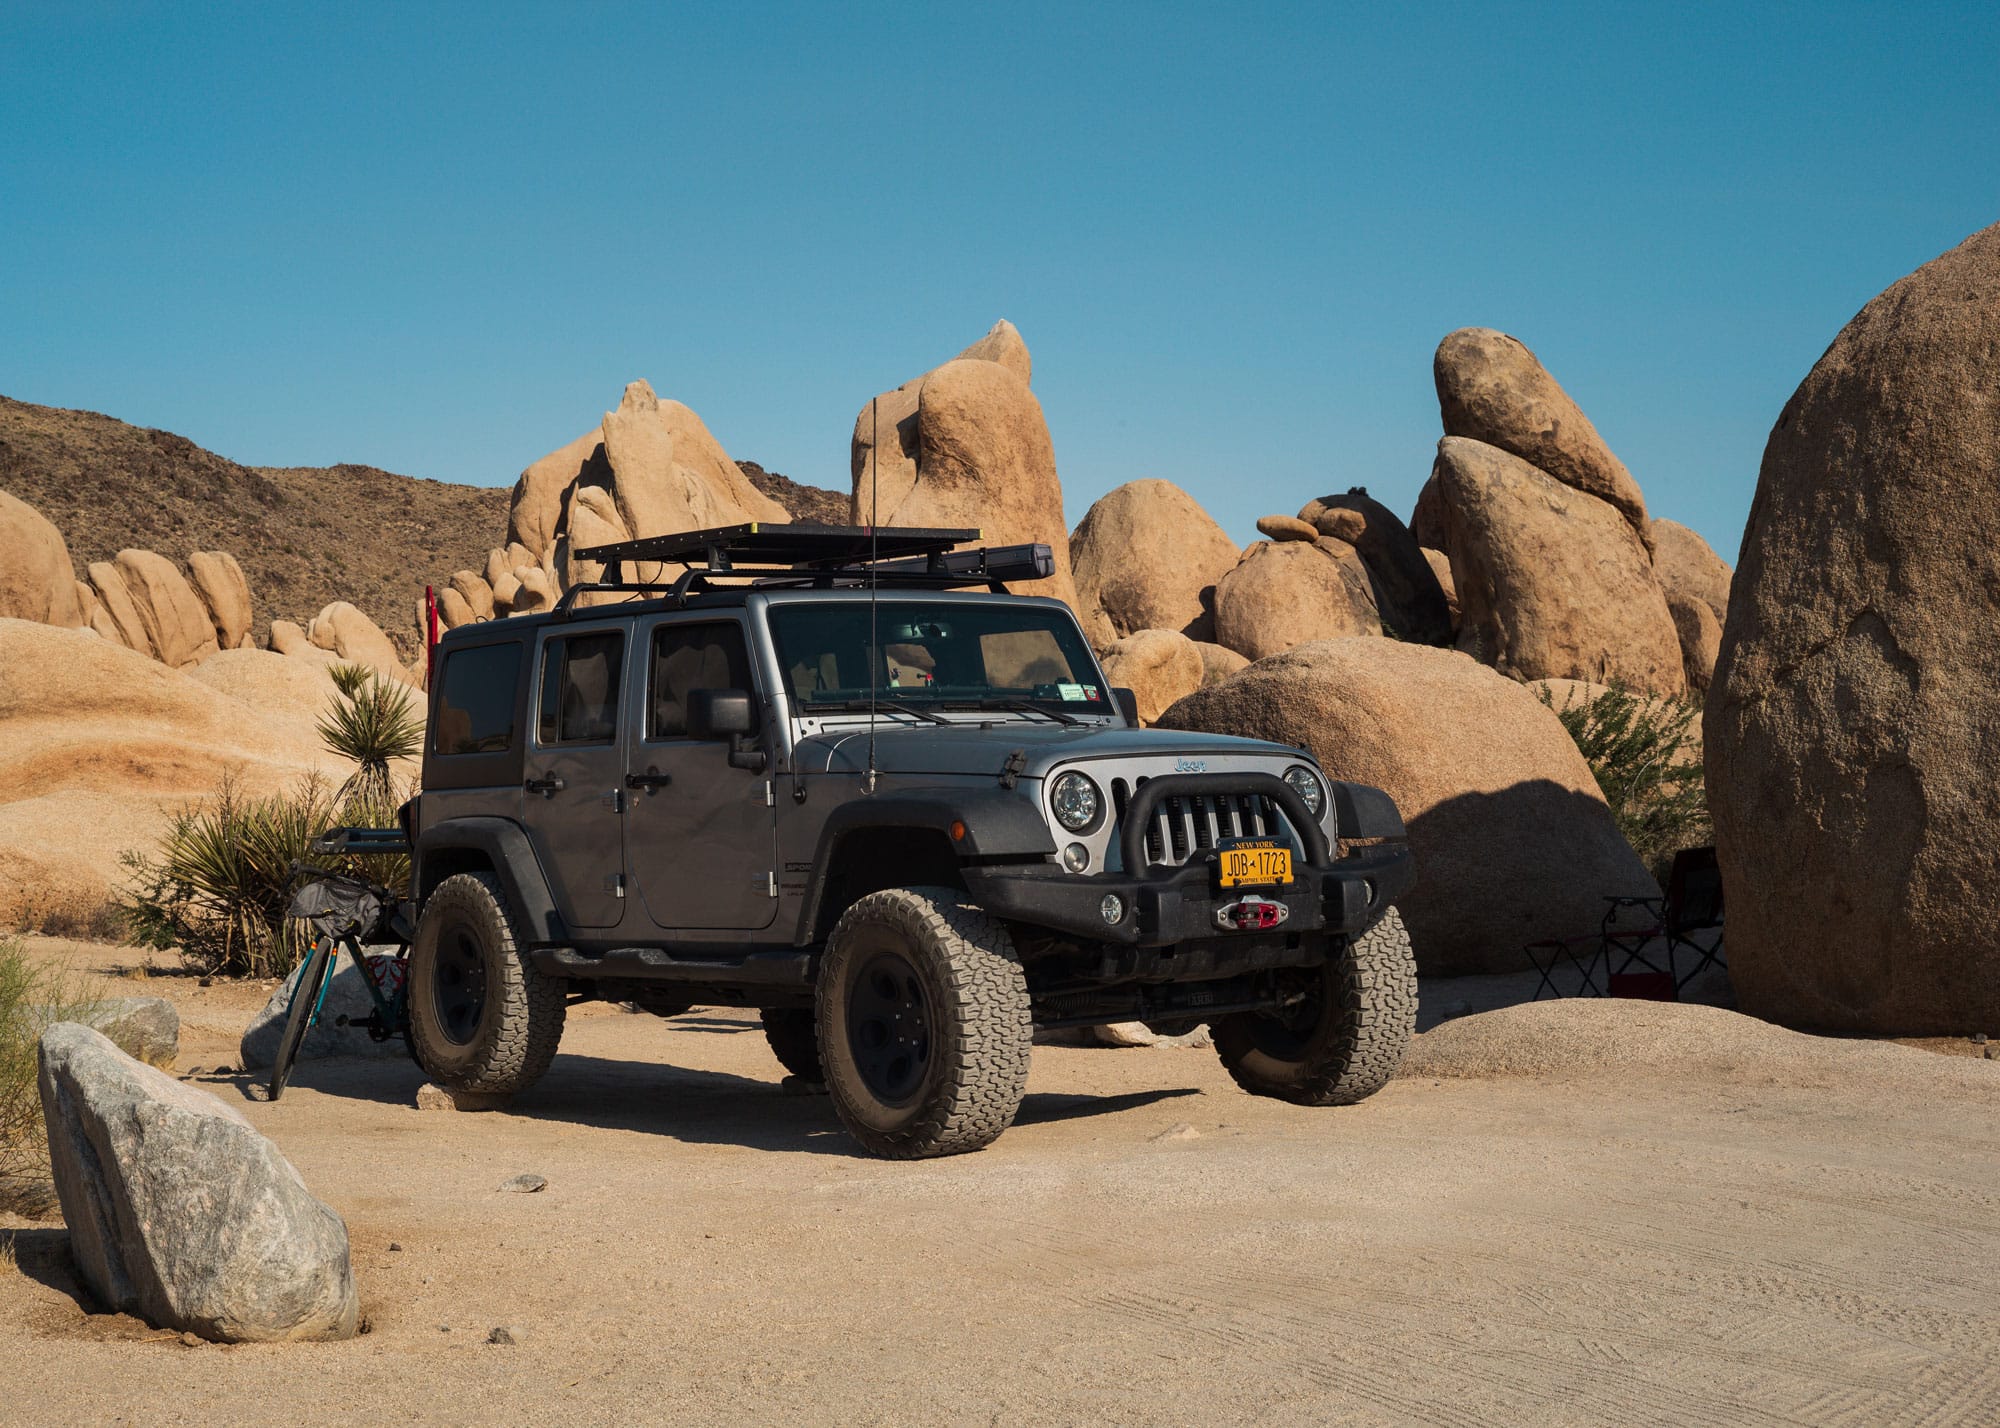 Introducing MAEV: The Very Capable Overlanding Rig Built For Serious Adventures And Explorations